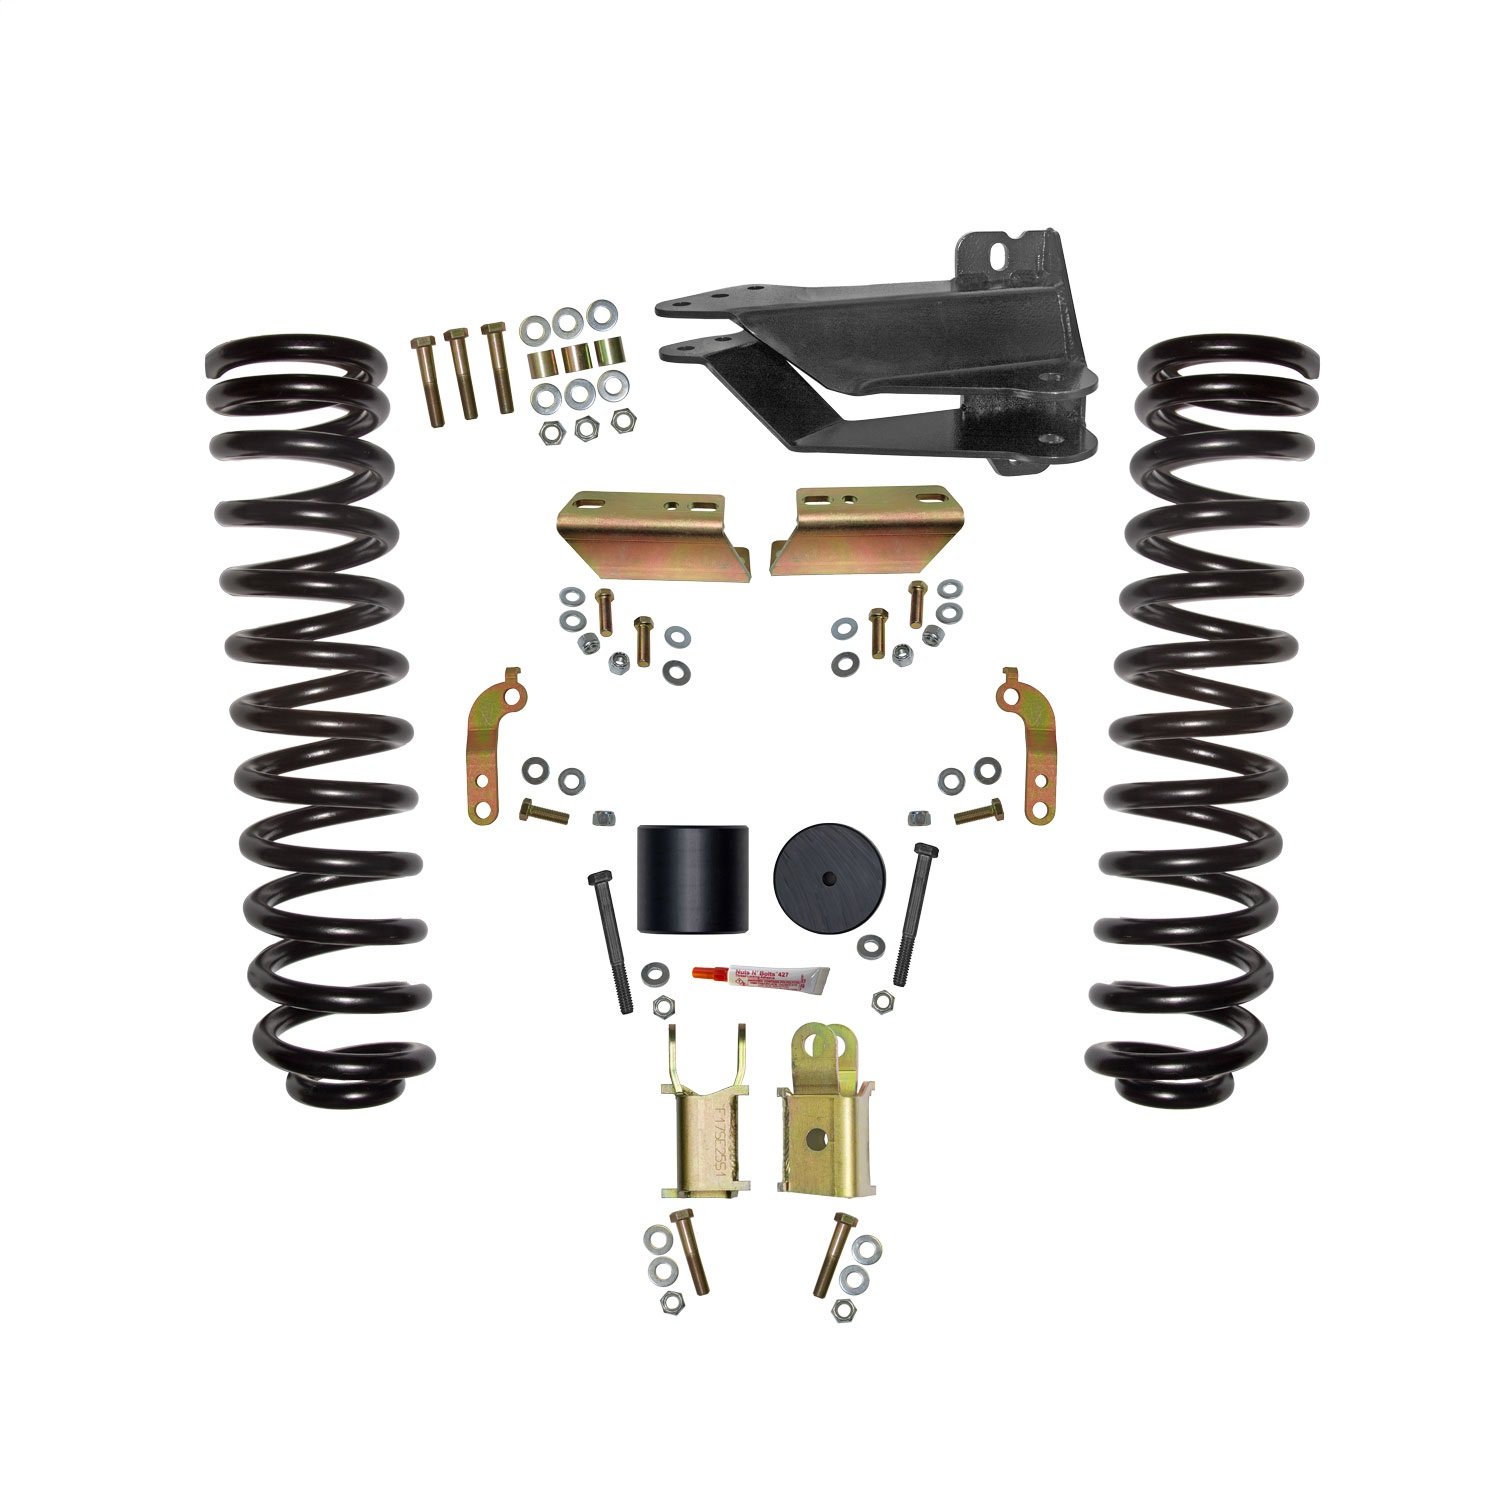 F1725VBK-E Front Leveling Kit with Shock Extension Brackets Fits Select Ford F-250, F-350 Super Duty Diesel Trucks [No Shocks]